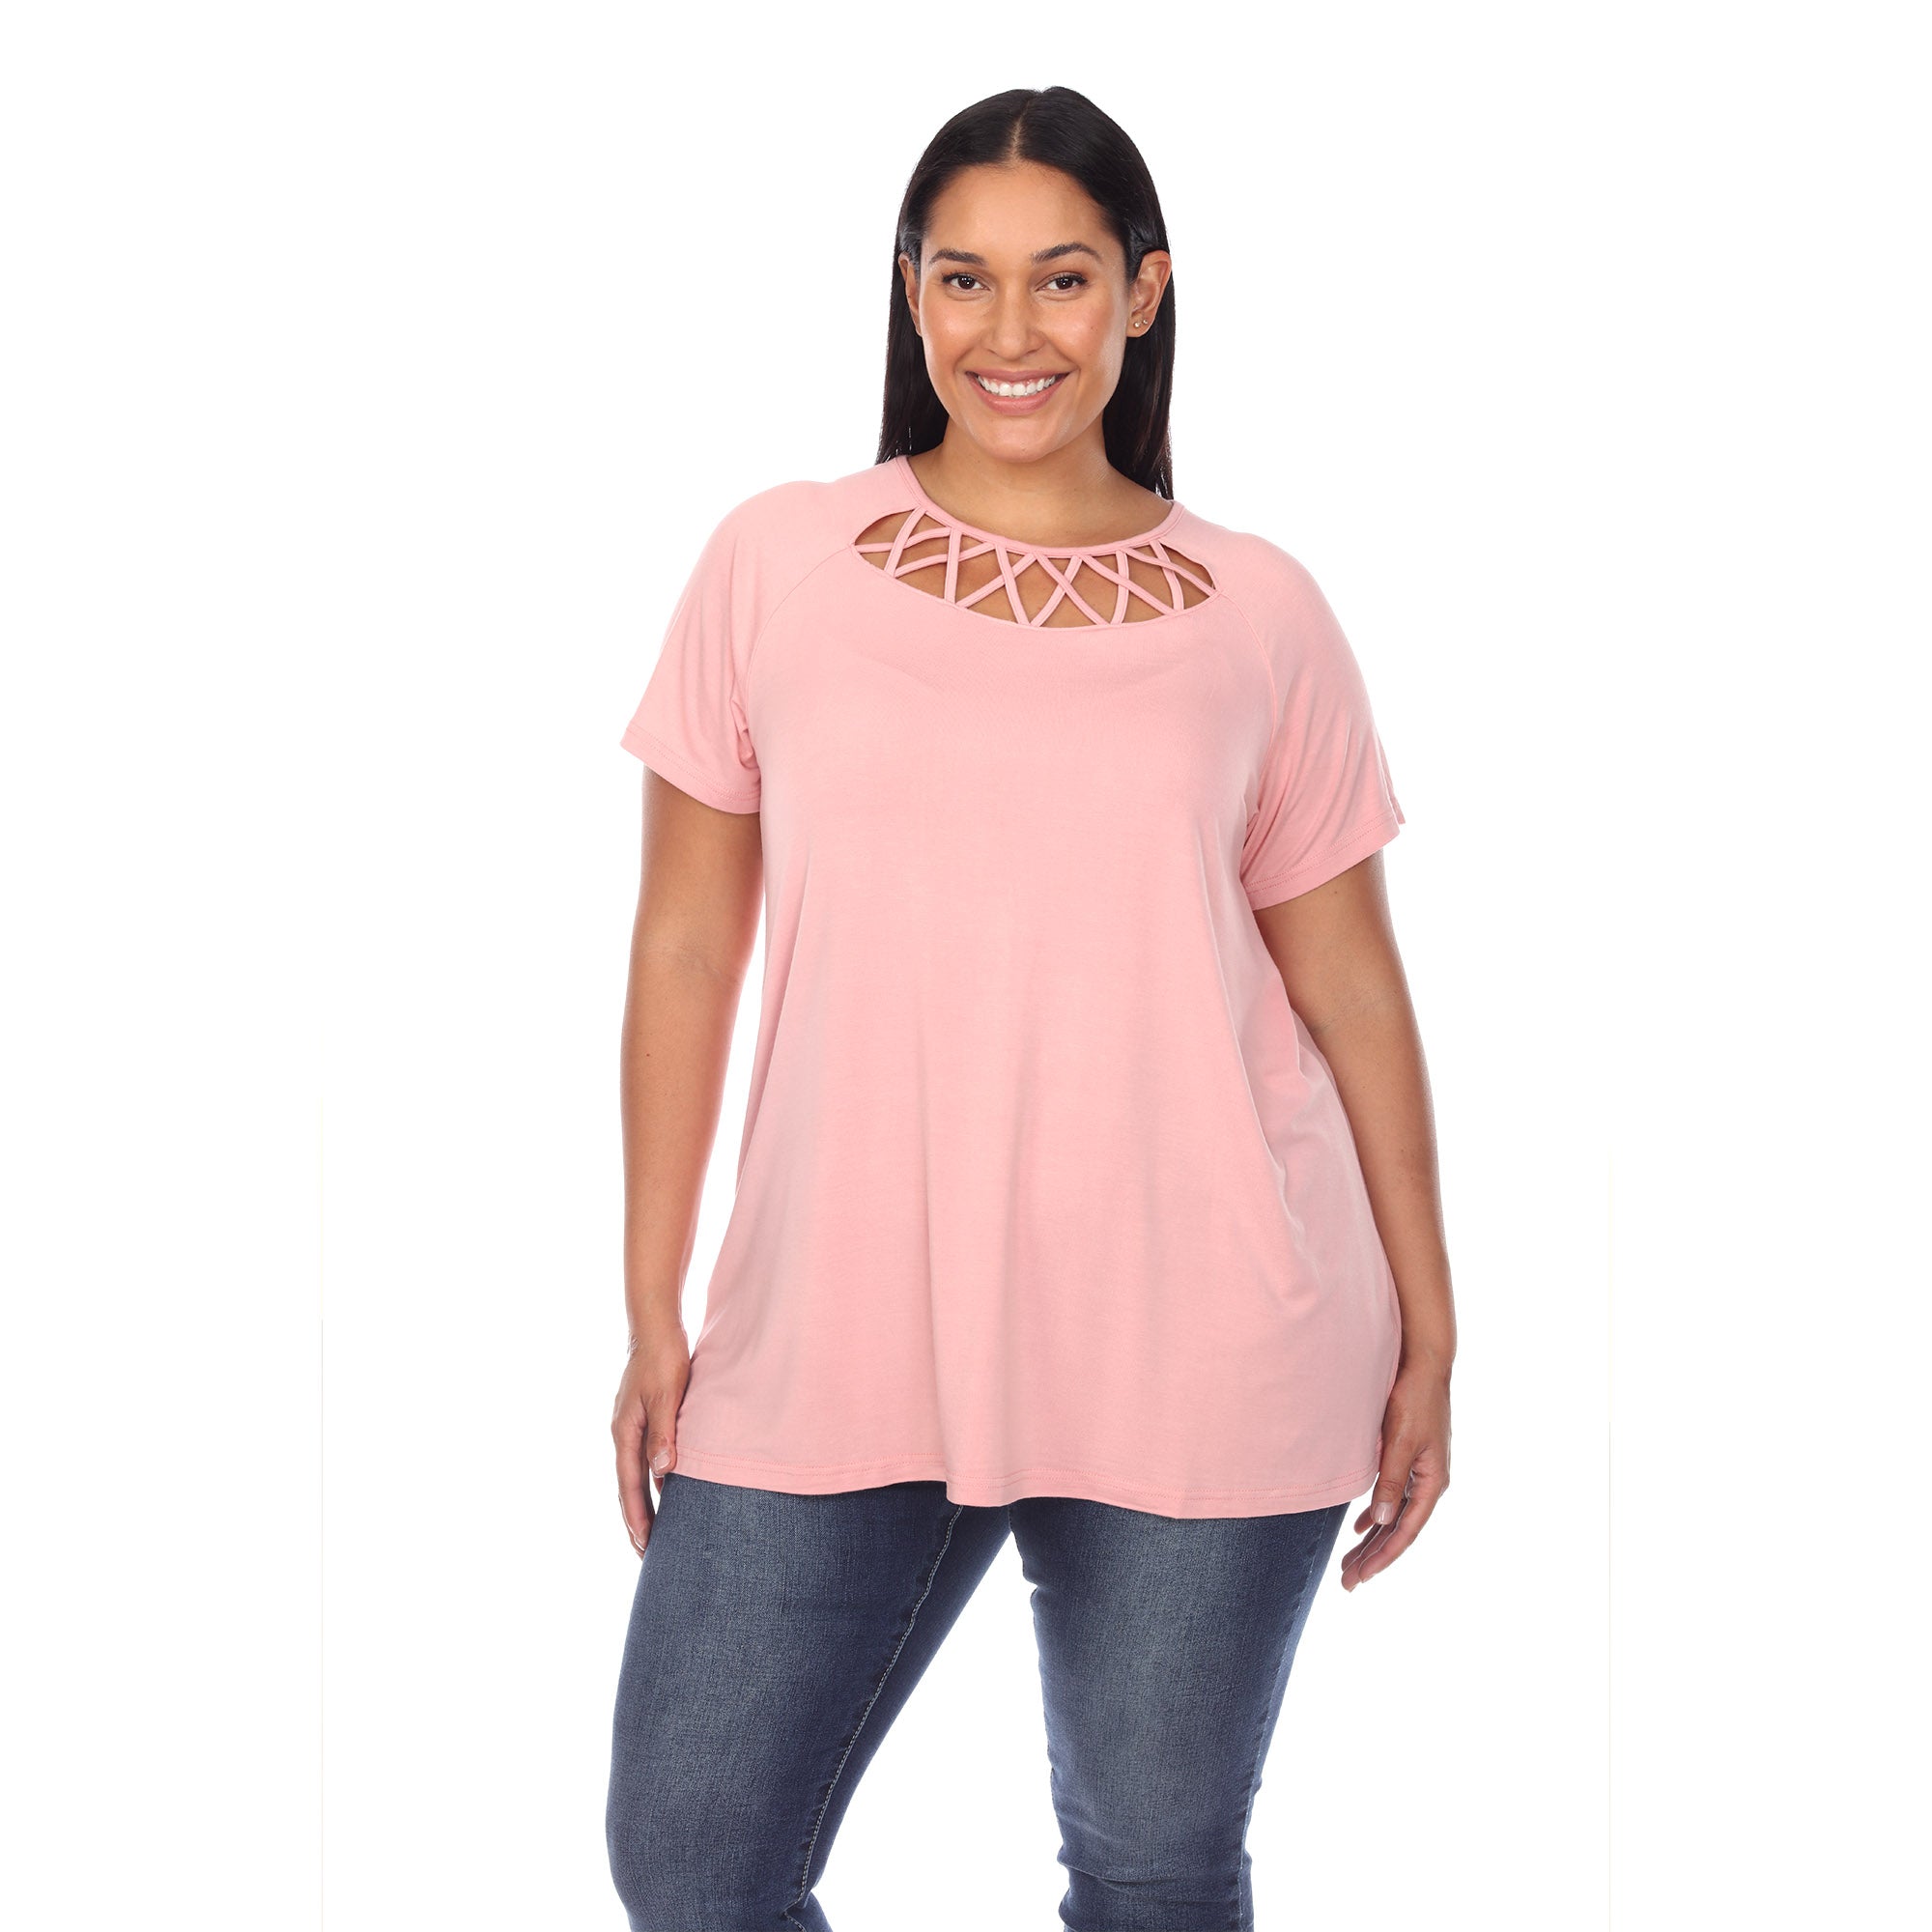 Blouses for Women Business Casual Fashion Womens Plus Size Cutout  Asymmetric Cold Shoulder T-shirt V-Neck Tops Solid Color Short Sleeve  Tshirts Shirts for Women ,Pink,XL 